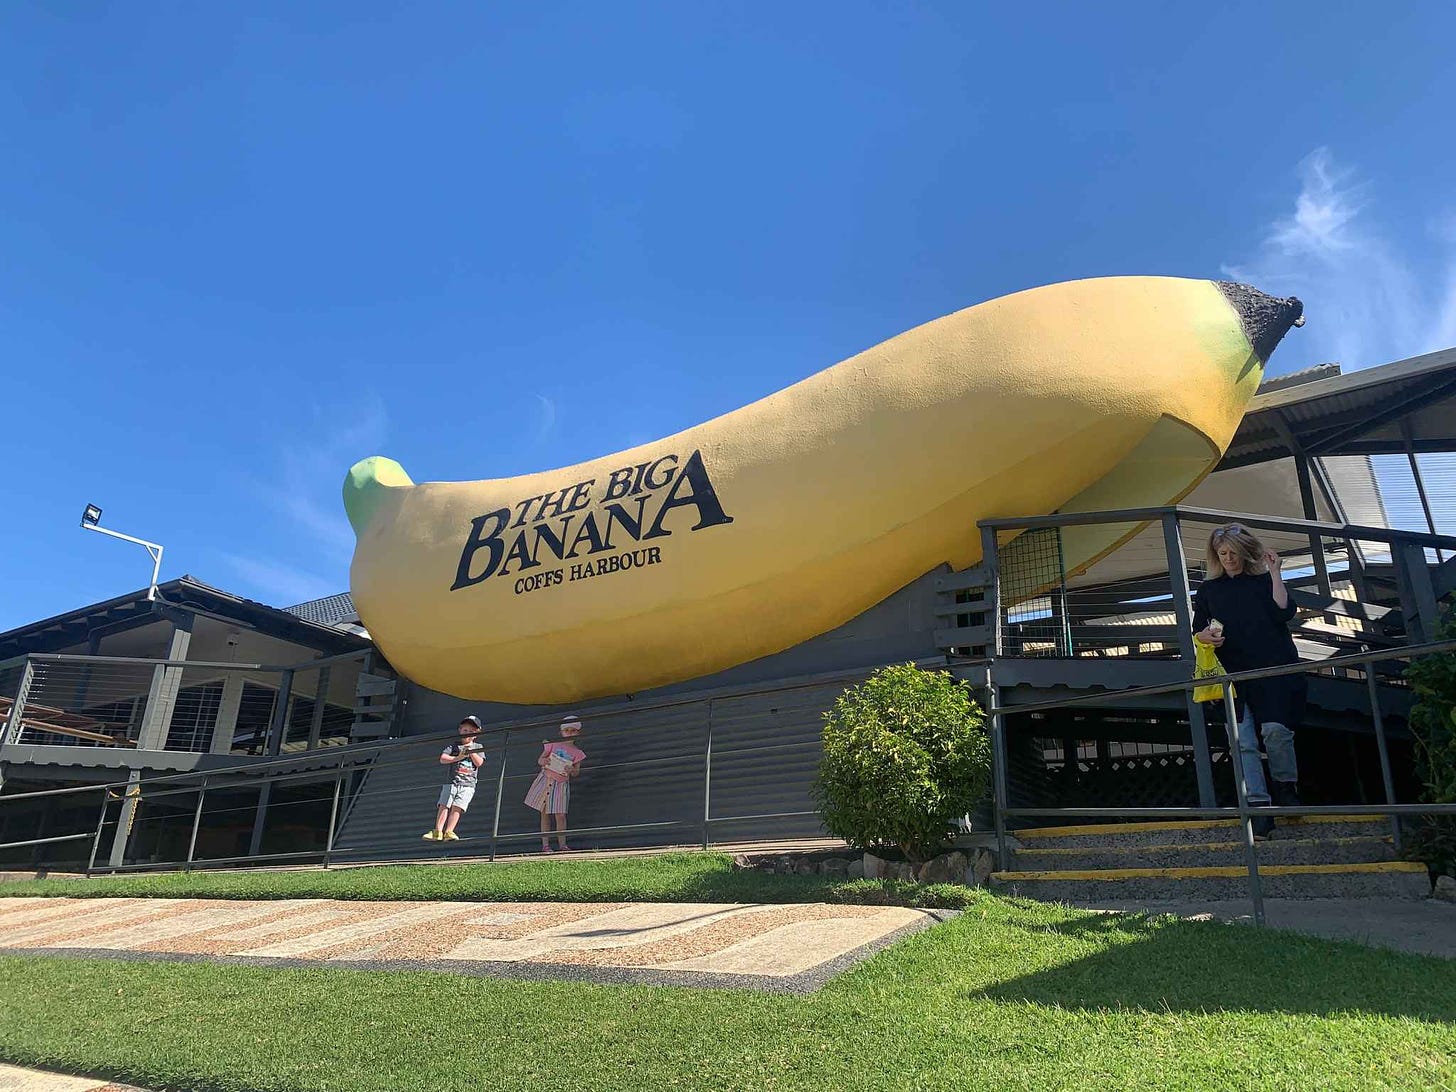 Two small children stand in front of The Big Banana at Coffs Harbour, under a bright blue sky.